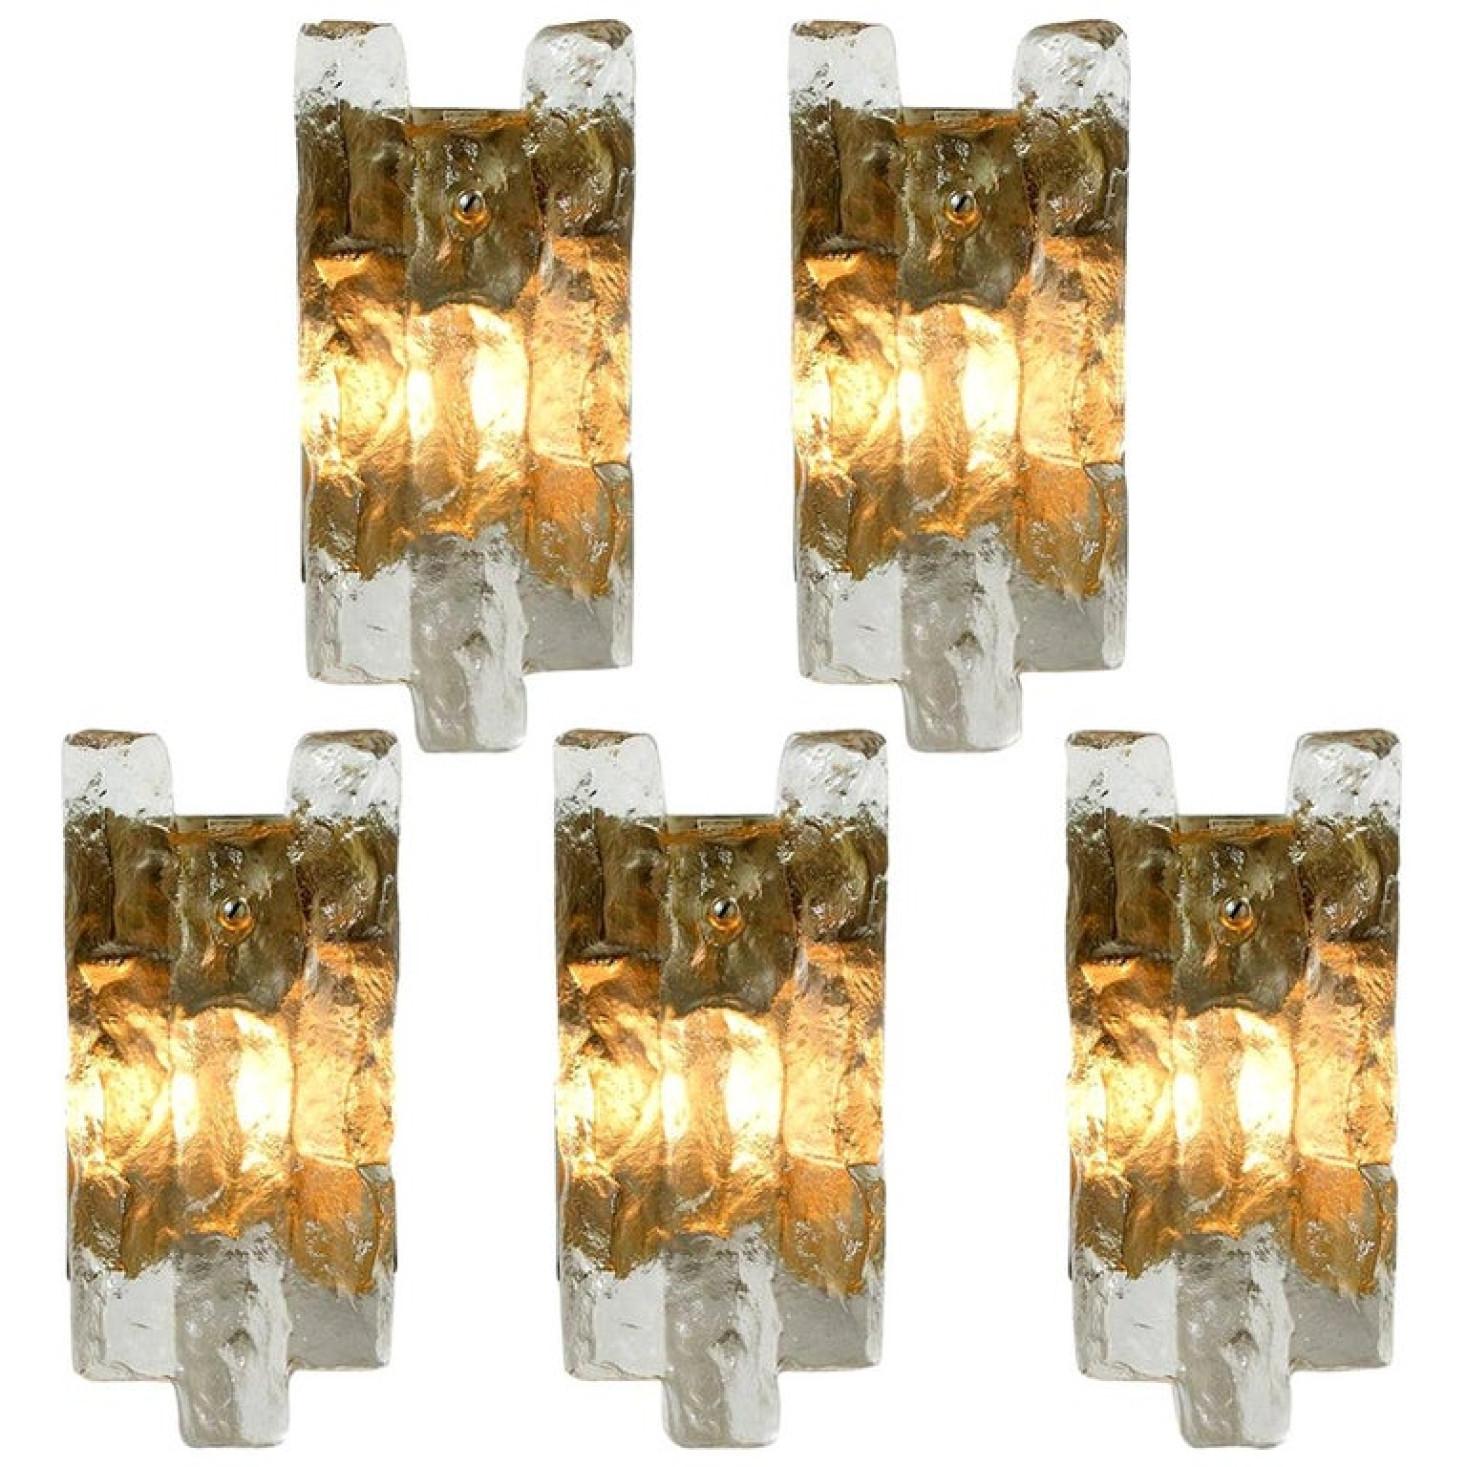 Set of beautiful and elegant modern brass wall lights/sconces, manufactured by J.T. Kalmar, Austria in the 1970s. Lovely design, executed to a very high standard. Each wall light has one solid ice glass sheets dangling on it. Clean lines to